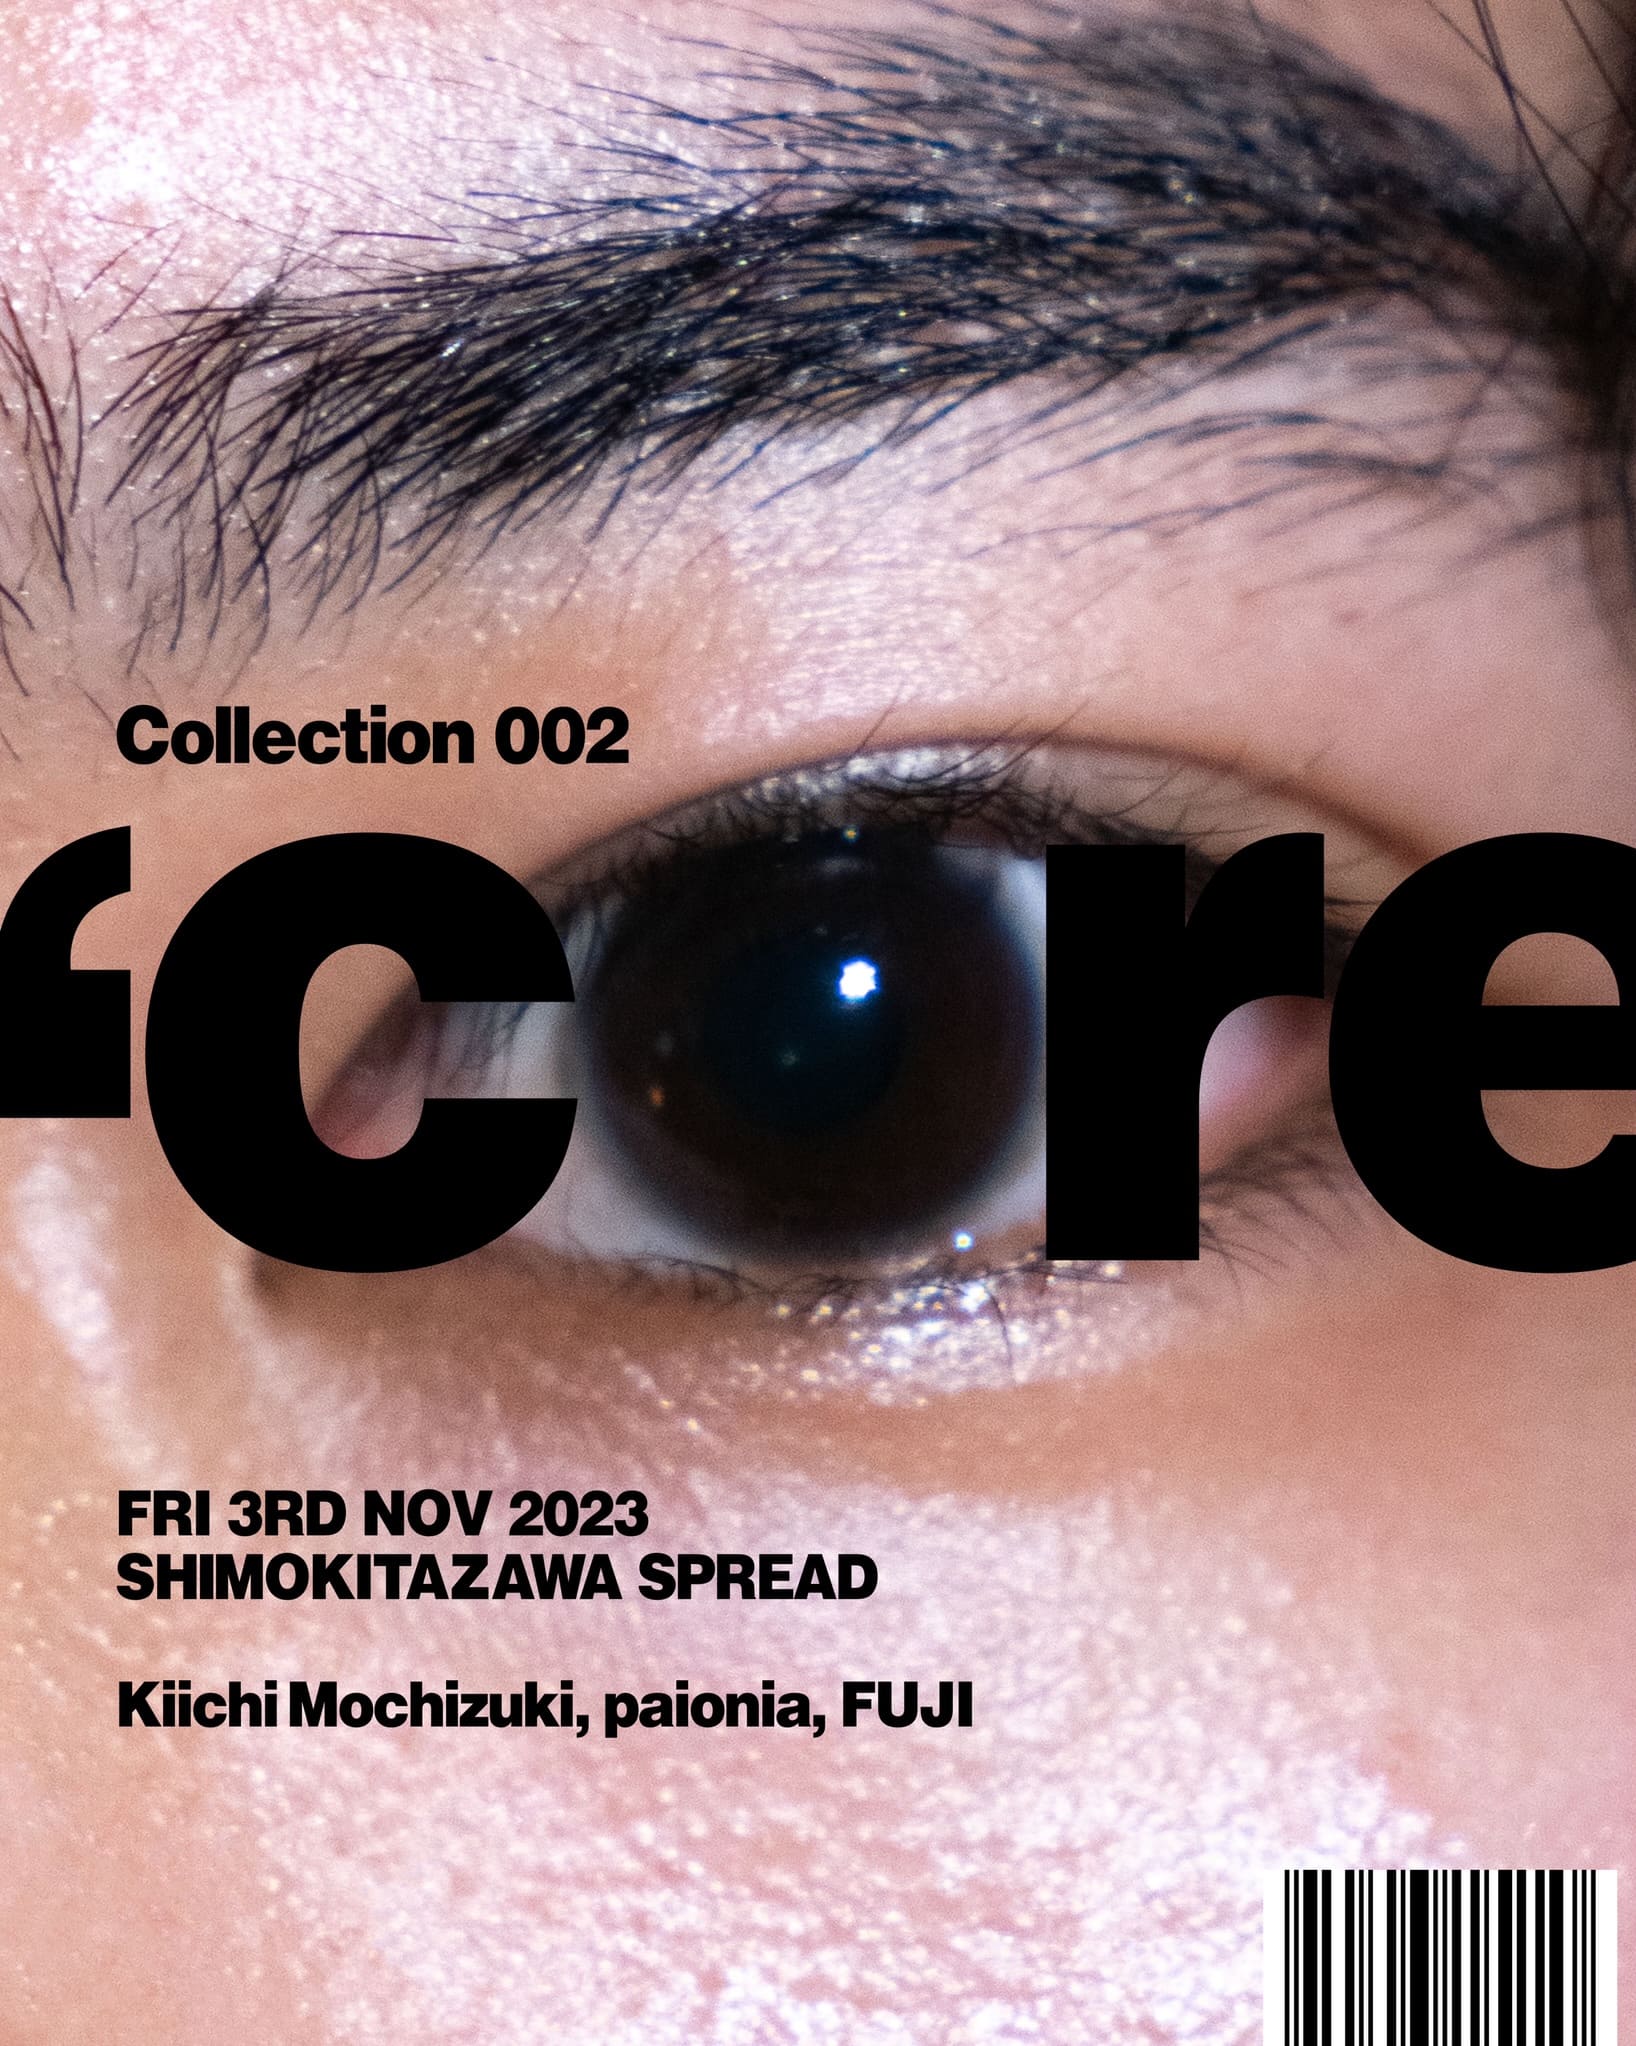 Collection 002 "core"